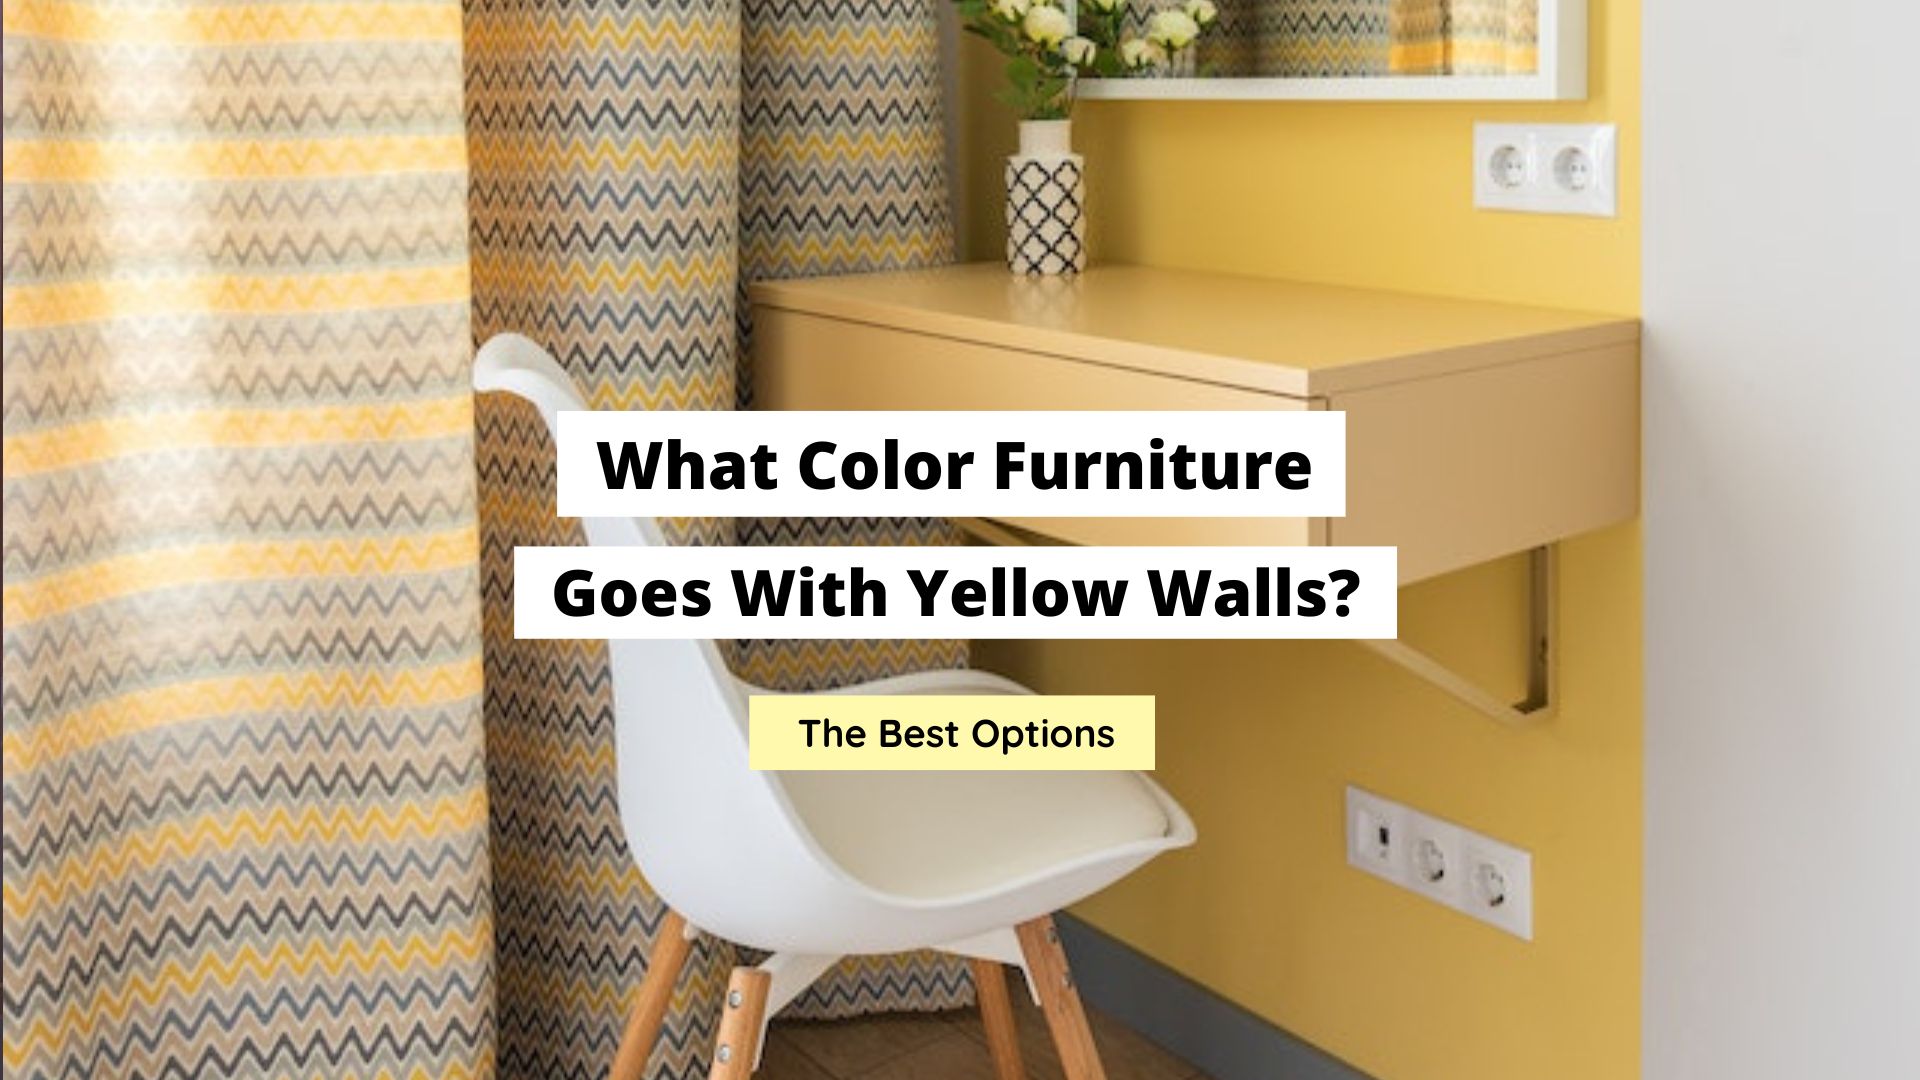 What Color Furniture Goes With Yellow Walls